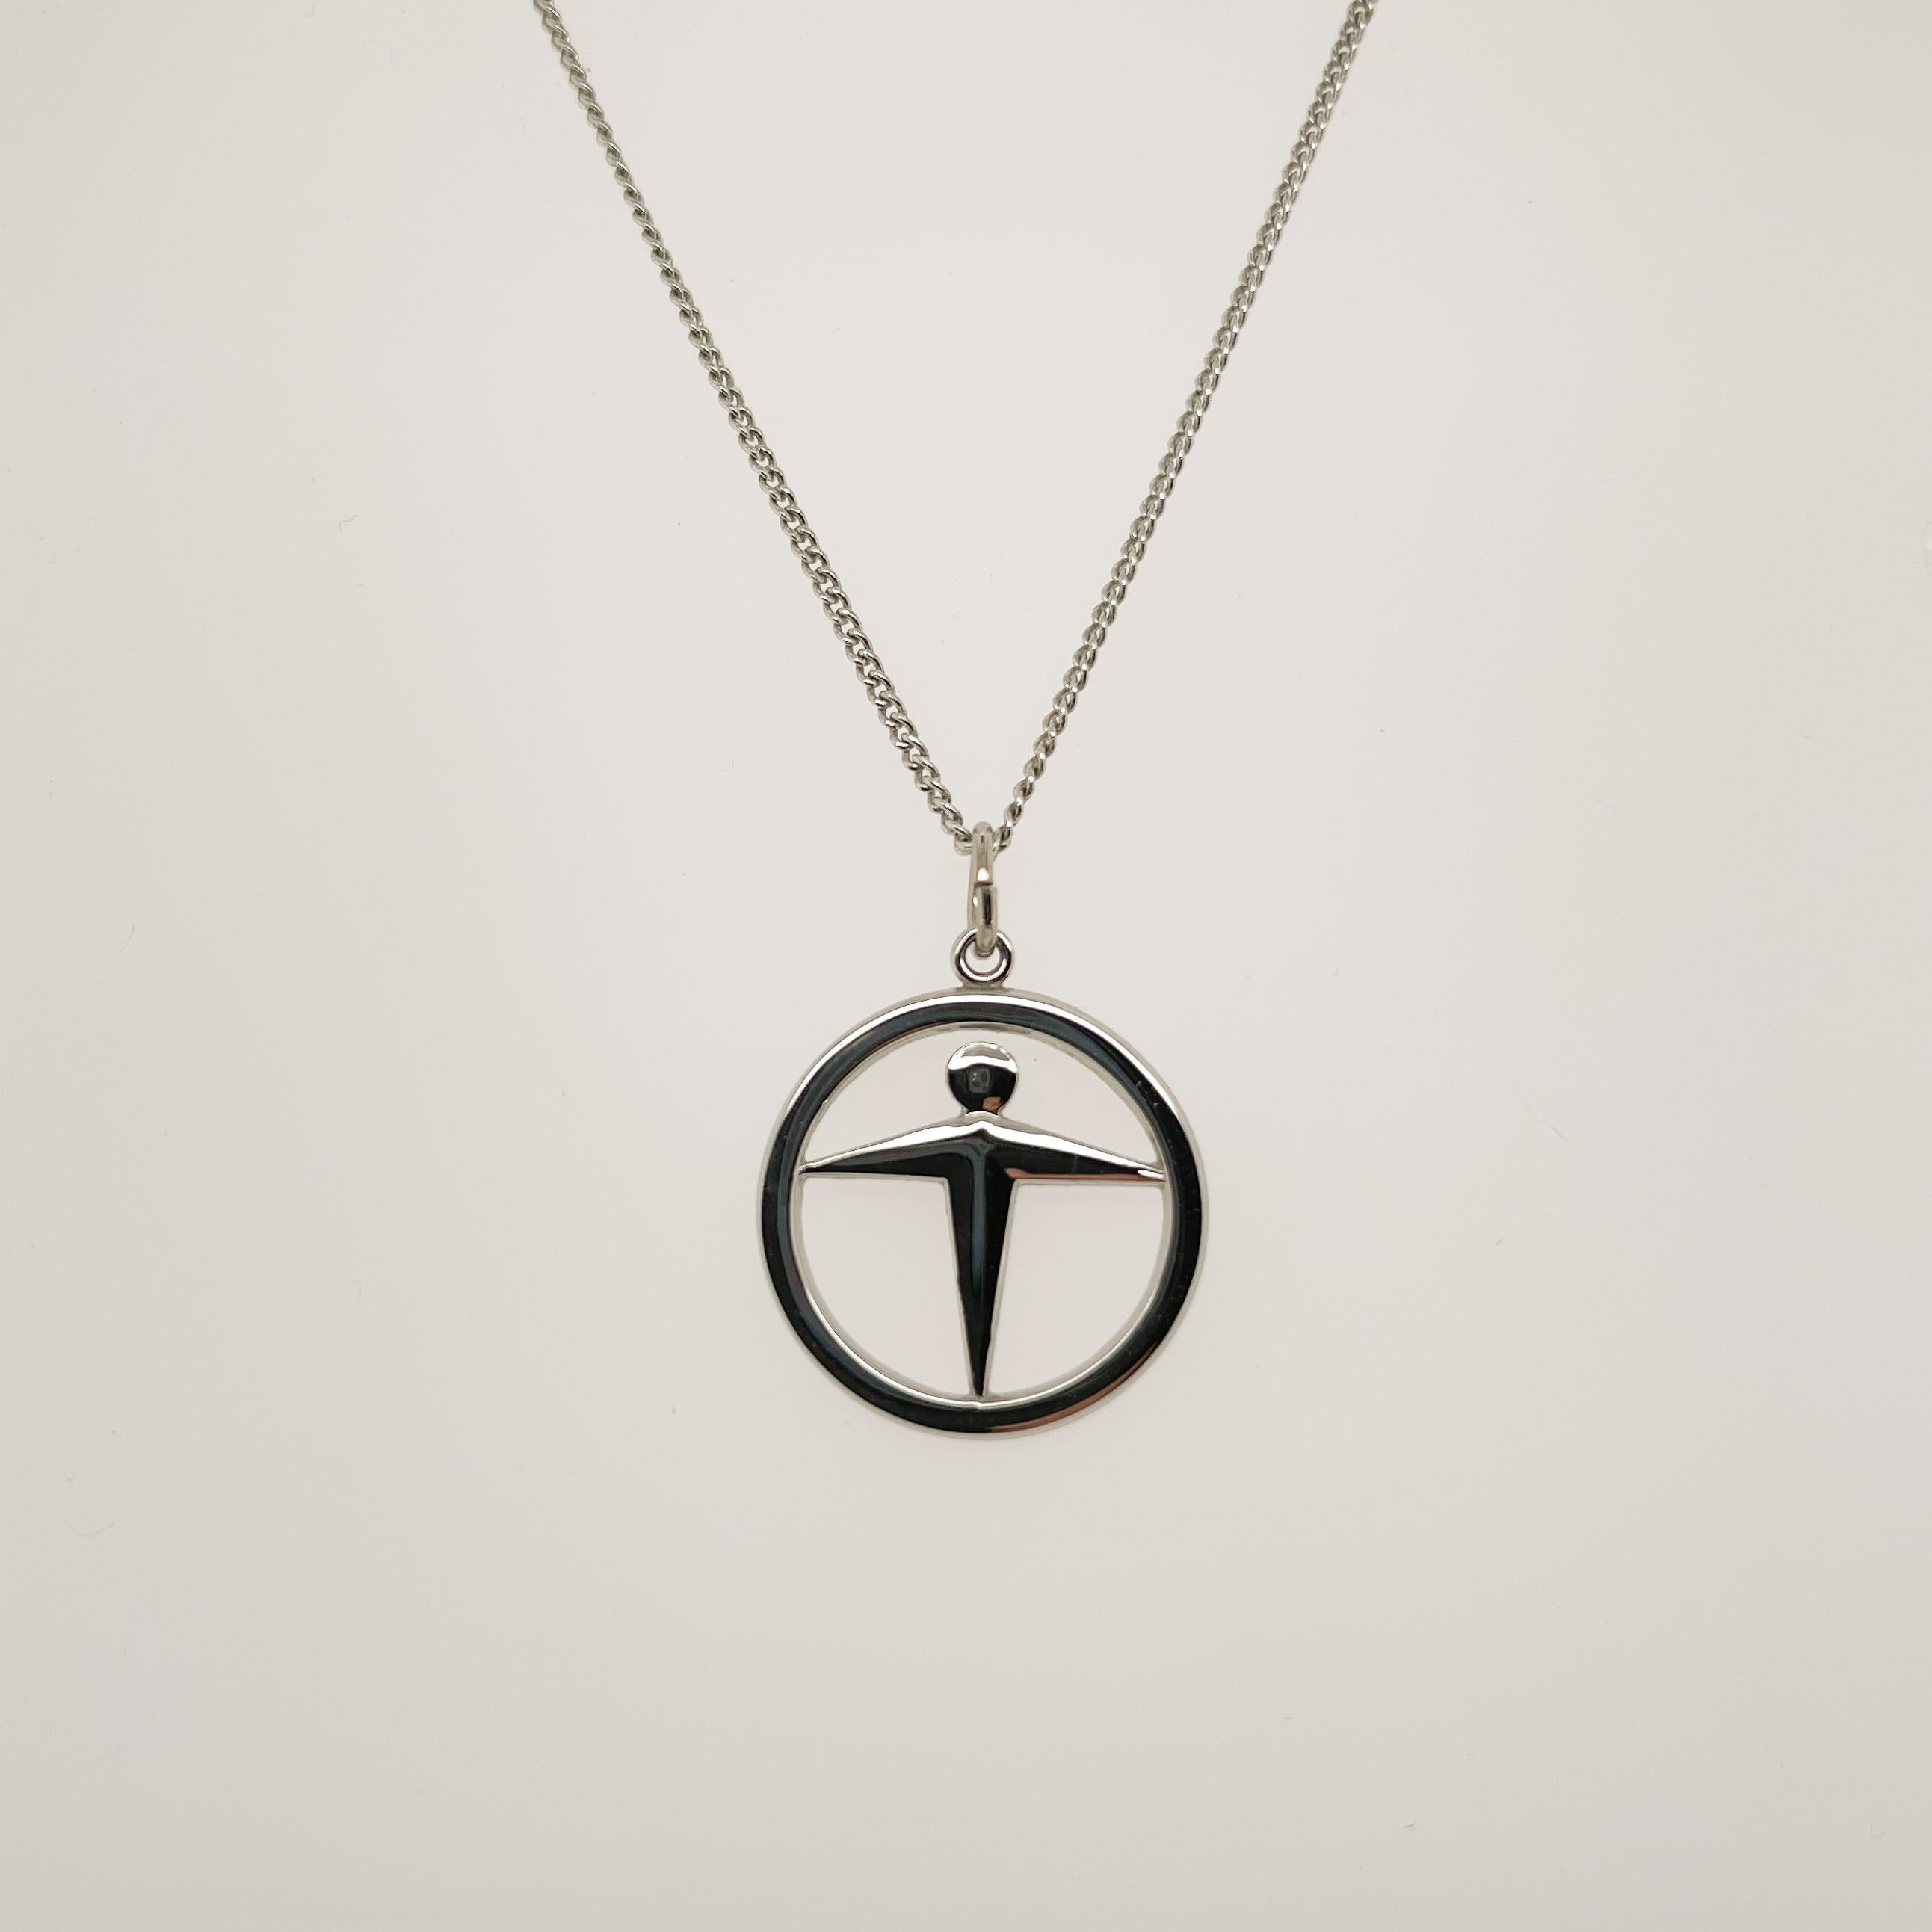 A fine Tiffany & Co. Manpower pendant.

In sterling silver. 

Together with a non-Tiffany associated sterling silver chain.

Date:
21st Century

Overall Condition:
It is in overall good, as-pictured, used estate condition with some very fine & light